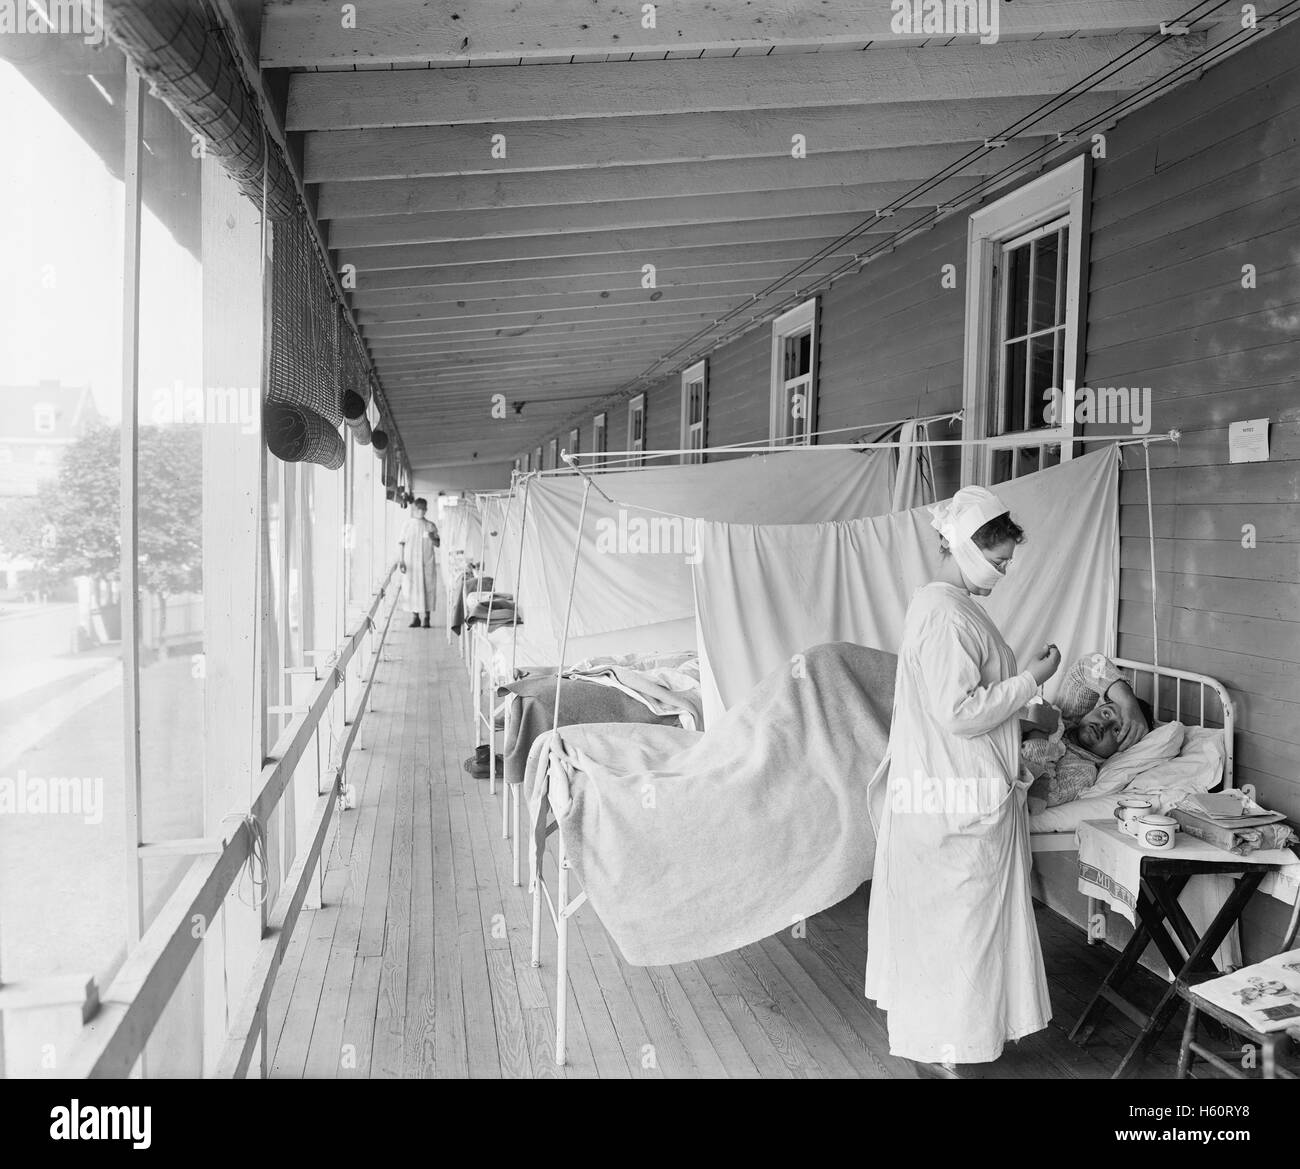 Masked Nurse at the Head of a Row of Beds Treating Patient during Influenza Pandemic, Walter Reed Hospital, Washington DC, USA, Harris & Ewing, 1918 Stock Photo